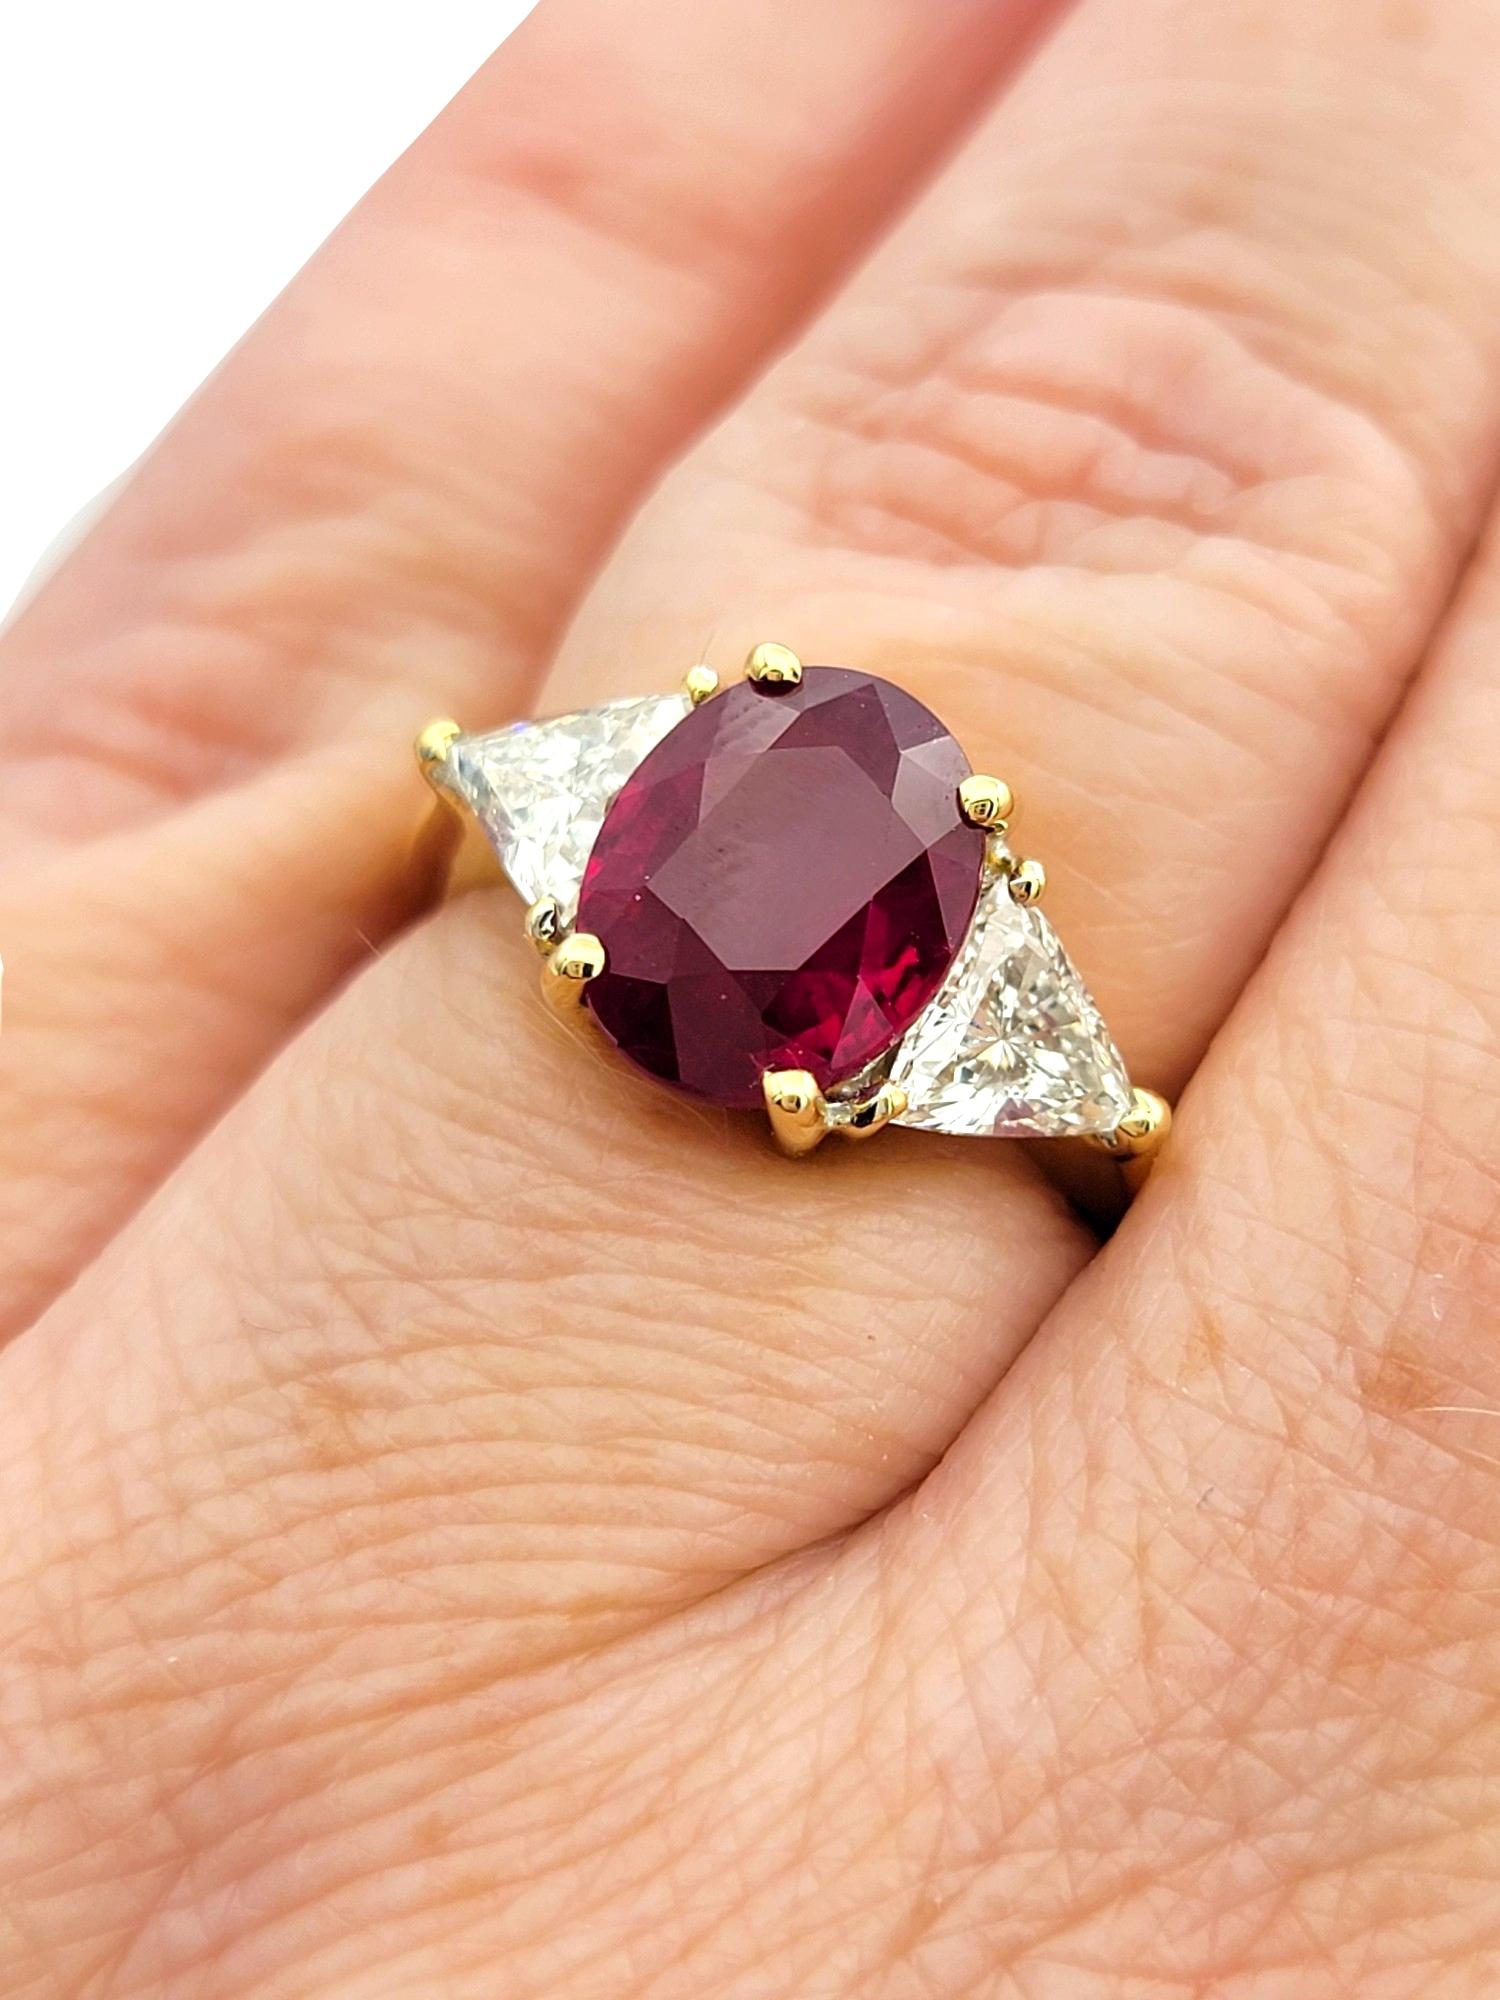 Rare Natural Oval Cut Burma Ruby and Trillion Diamond Ring 18 Karat Yellow Gold For Sale 4